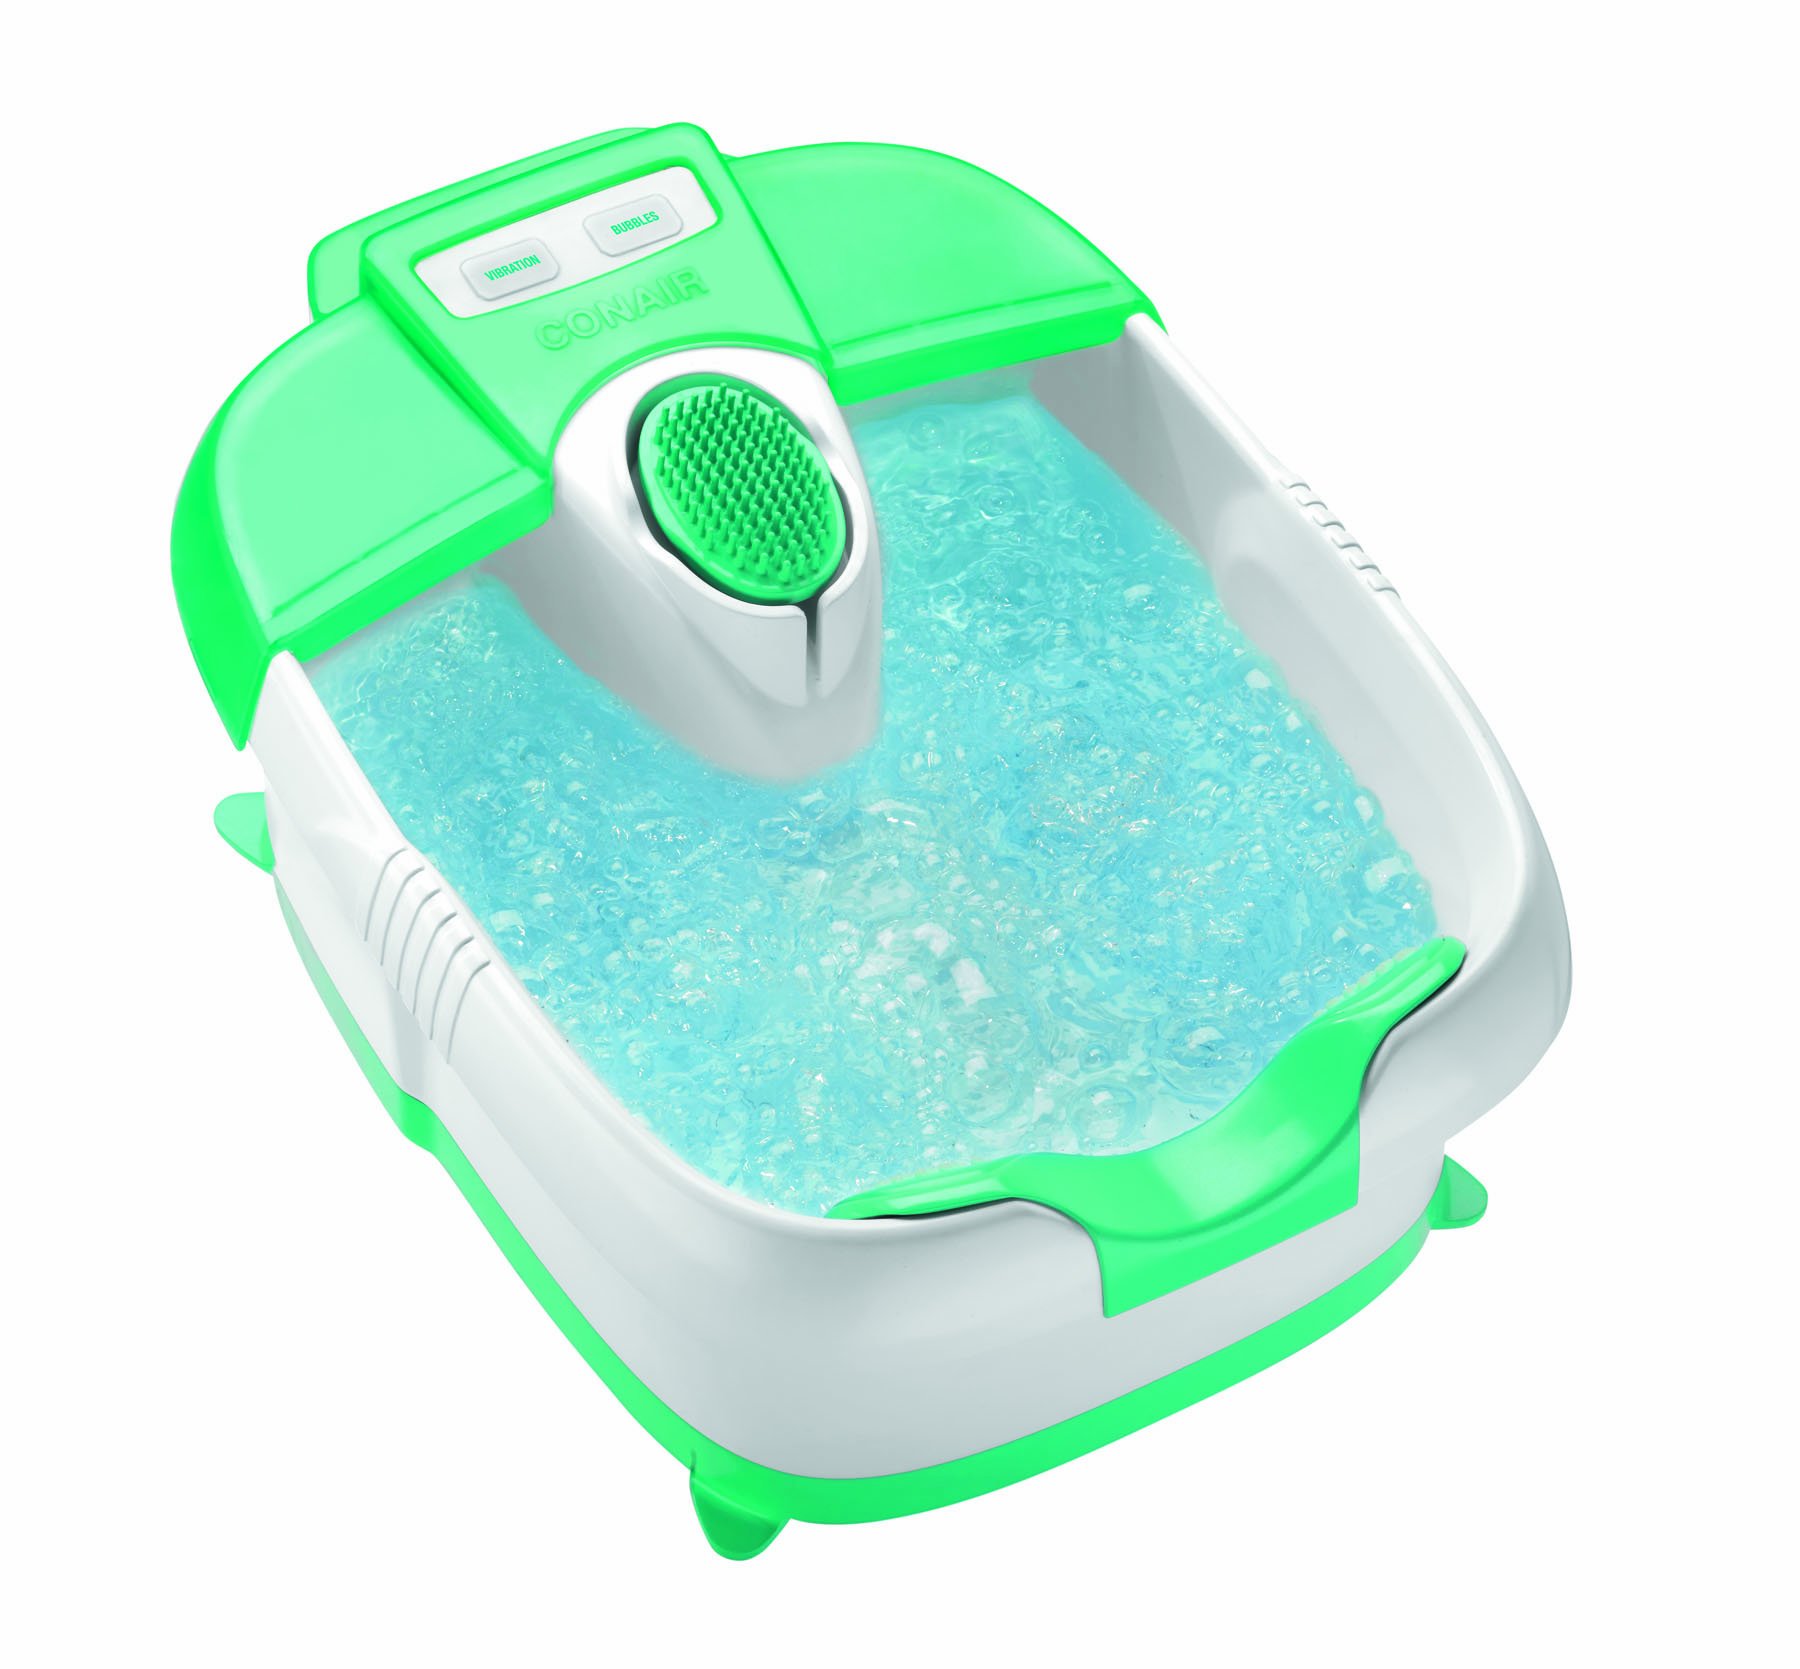 Conair Pedicure Foot Spa with Massage and Bubbles/Vibration